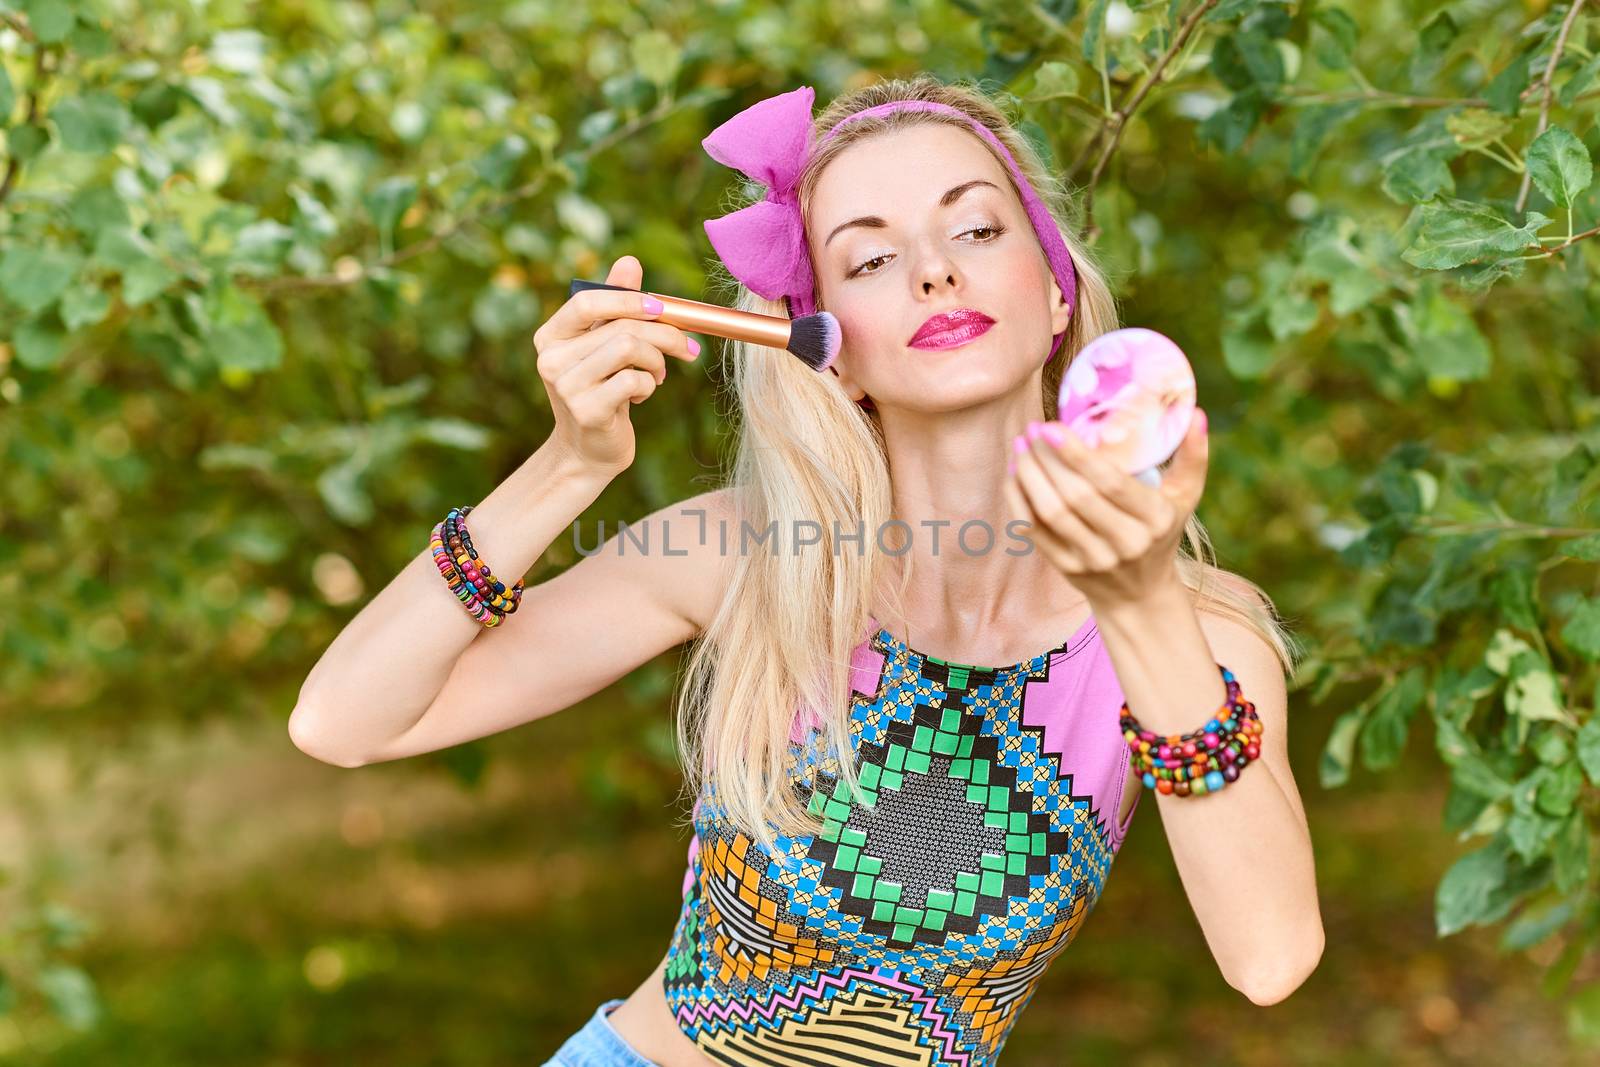 Beauty portrait stylish playful woman smiling primping with mirror, park, people, outdoors. Attractive hipster happy pretty blonde girl with bow, fashionable top. Relax, summer garden, lifestyle,bokeh